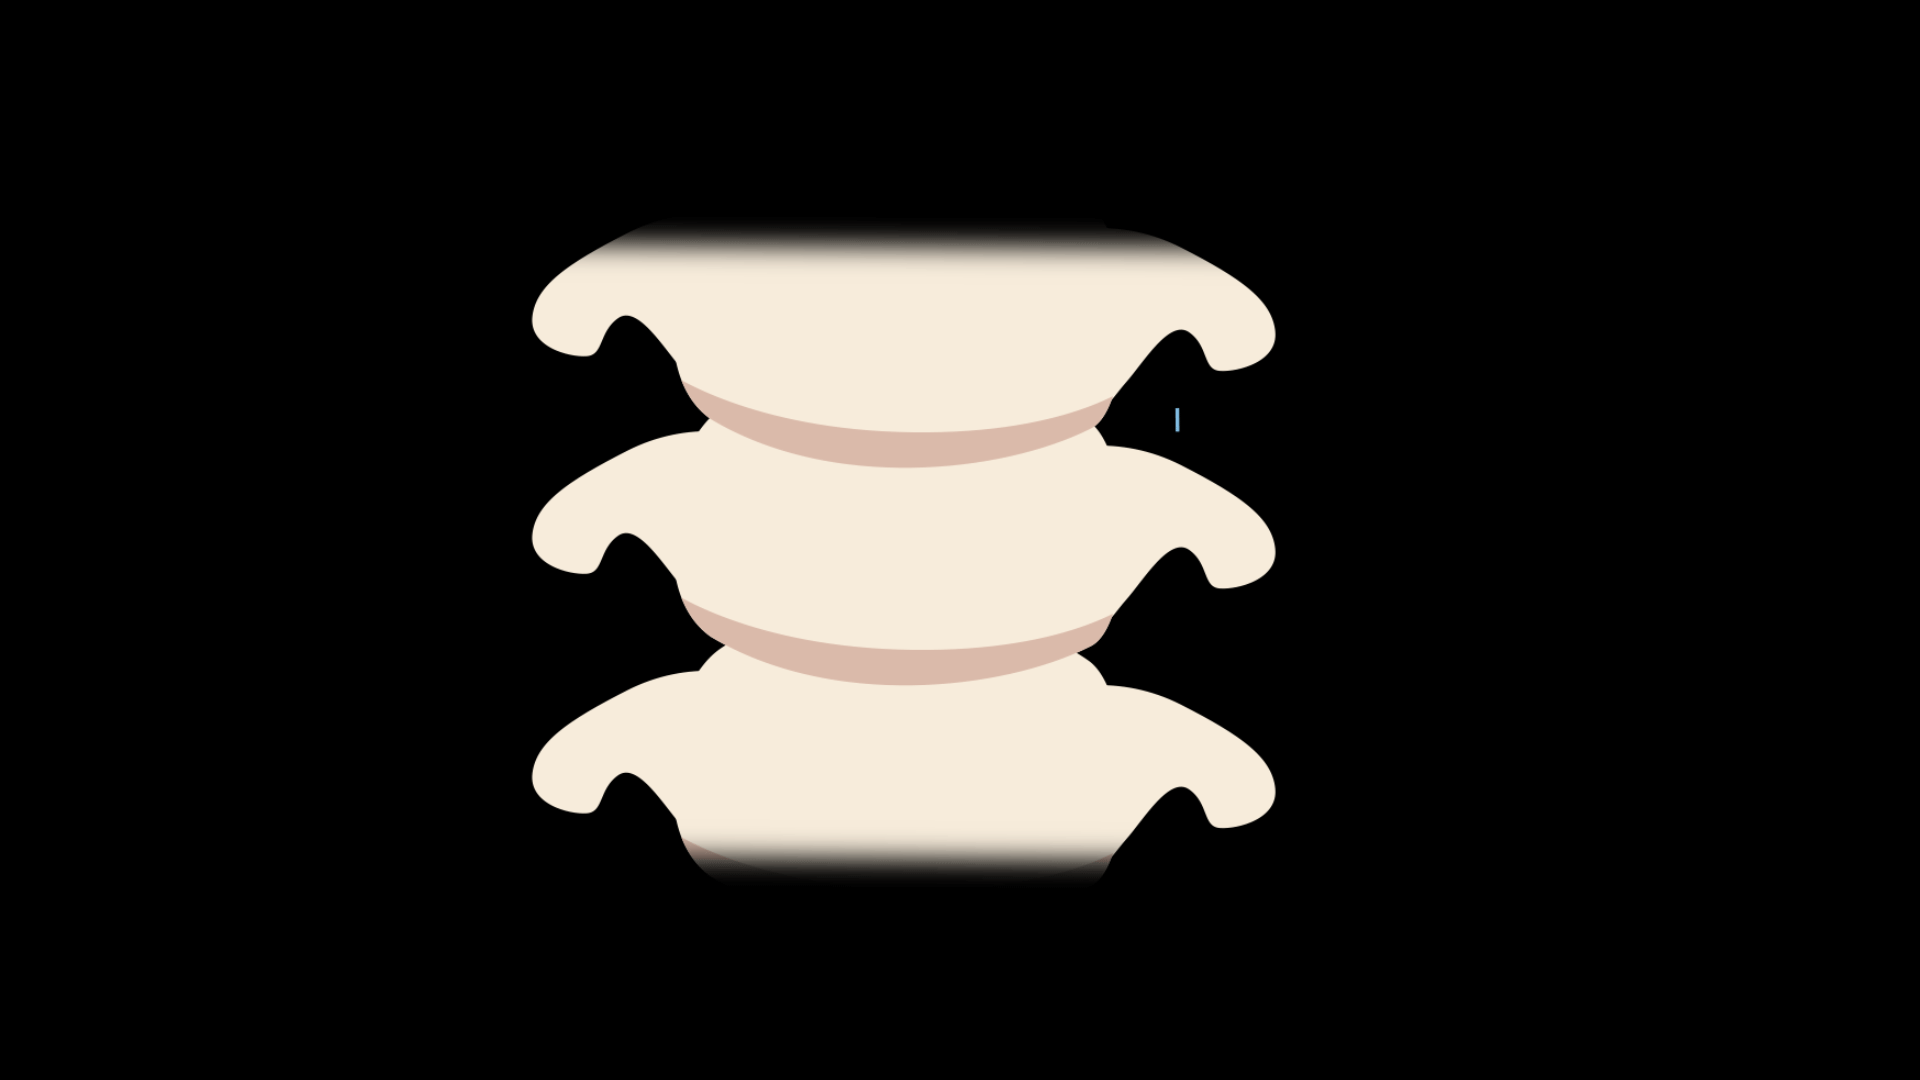 <p>Joints that only allow for a gliding movement in a sliding motion, like those depicted in the image. One example is the intercarpal joints in the wrist.</p>